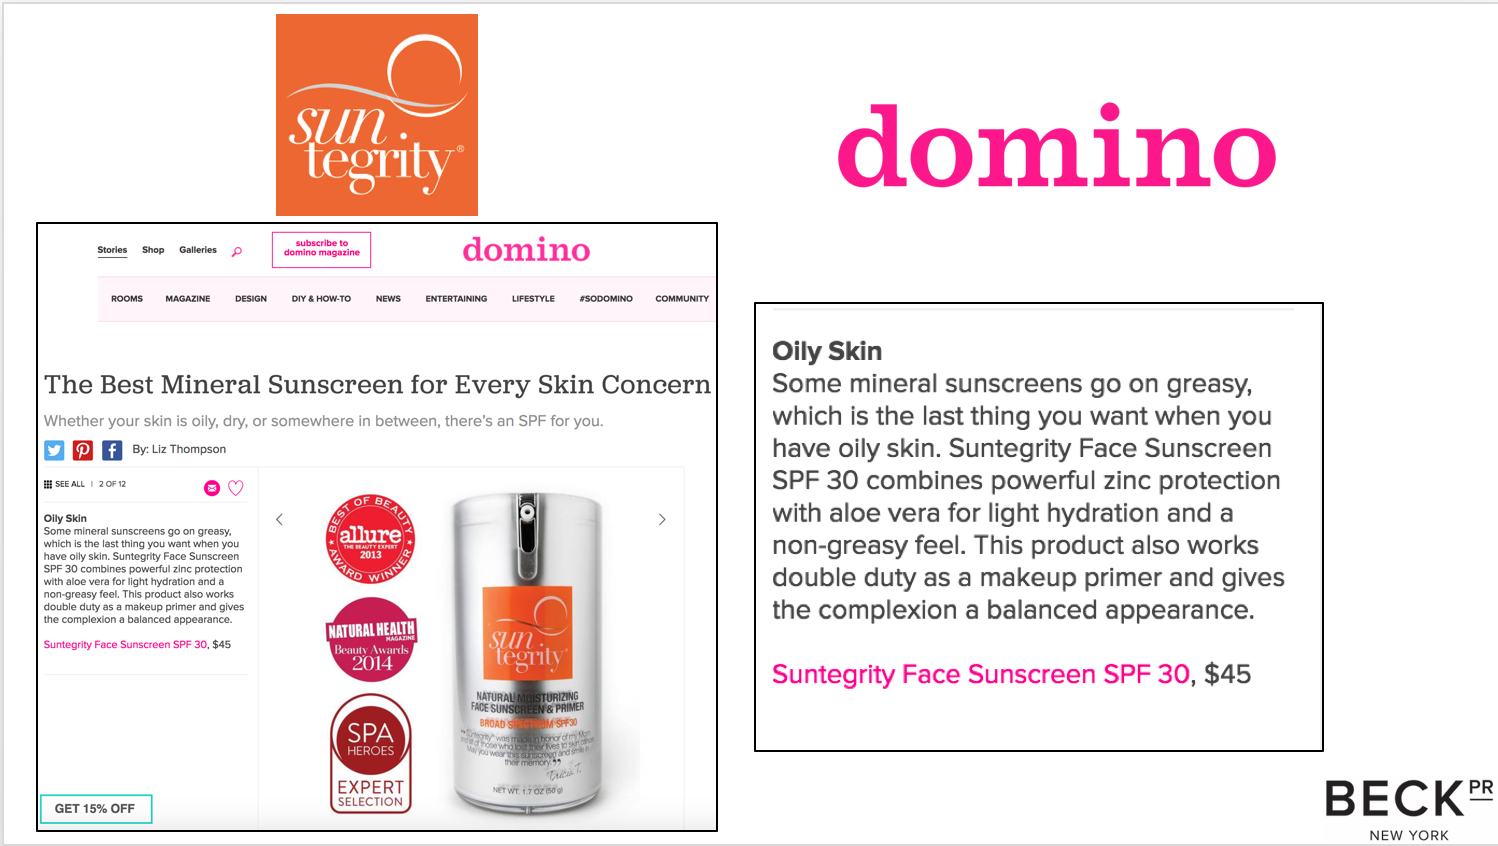 The Best Mineral Sunscreen For Every Skin Concern - Suntegrity Skincare